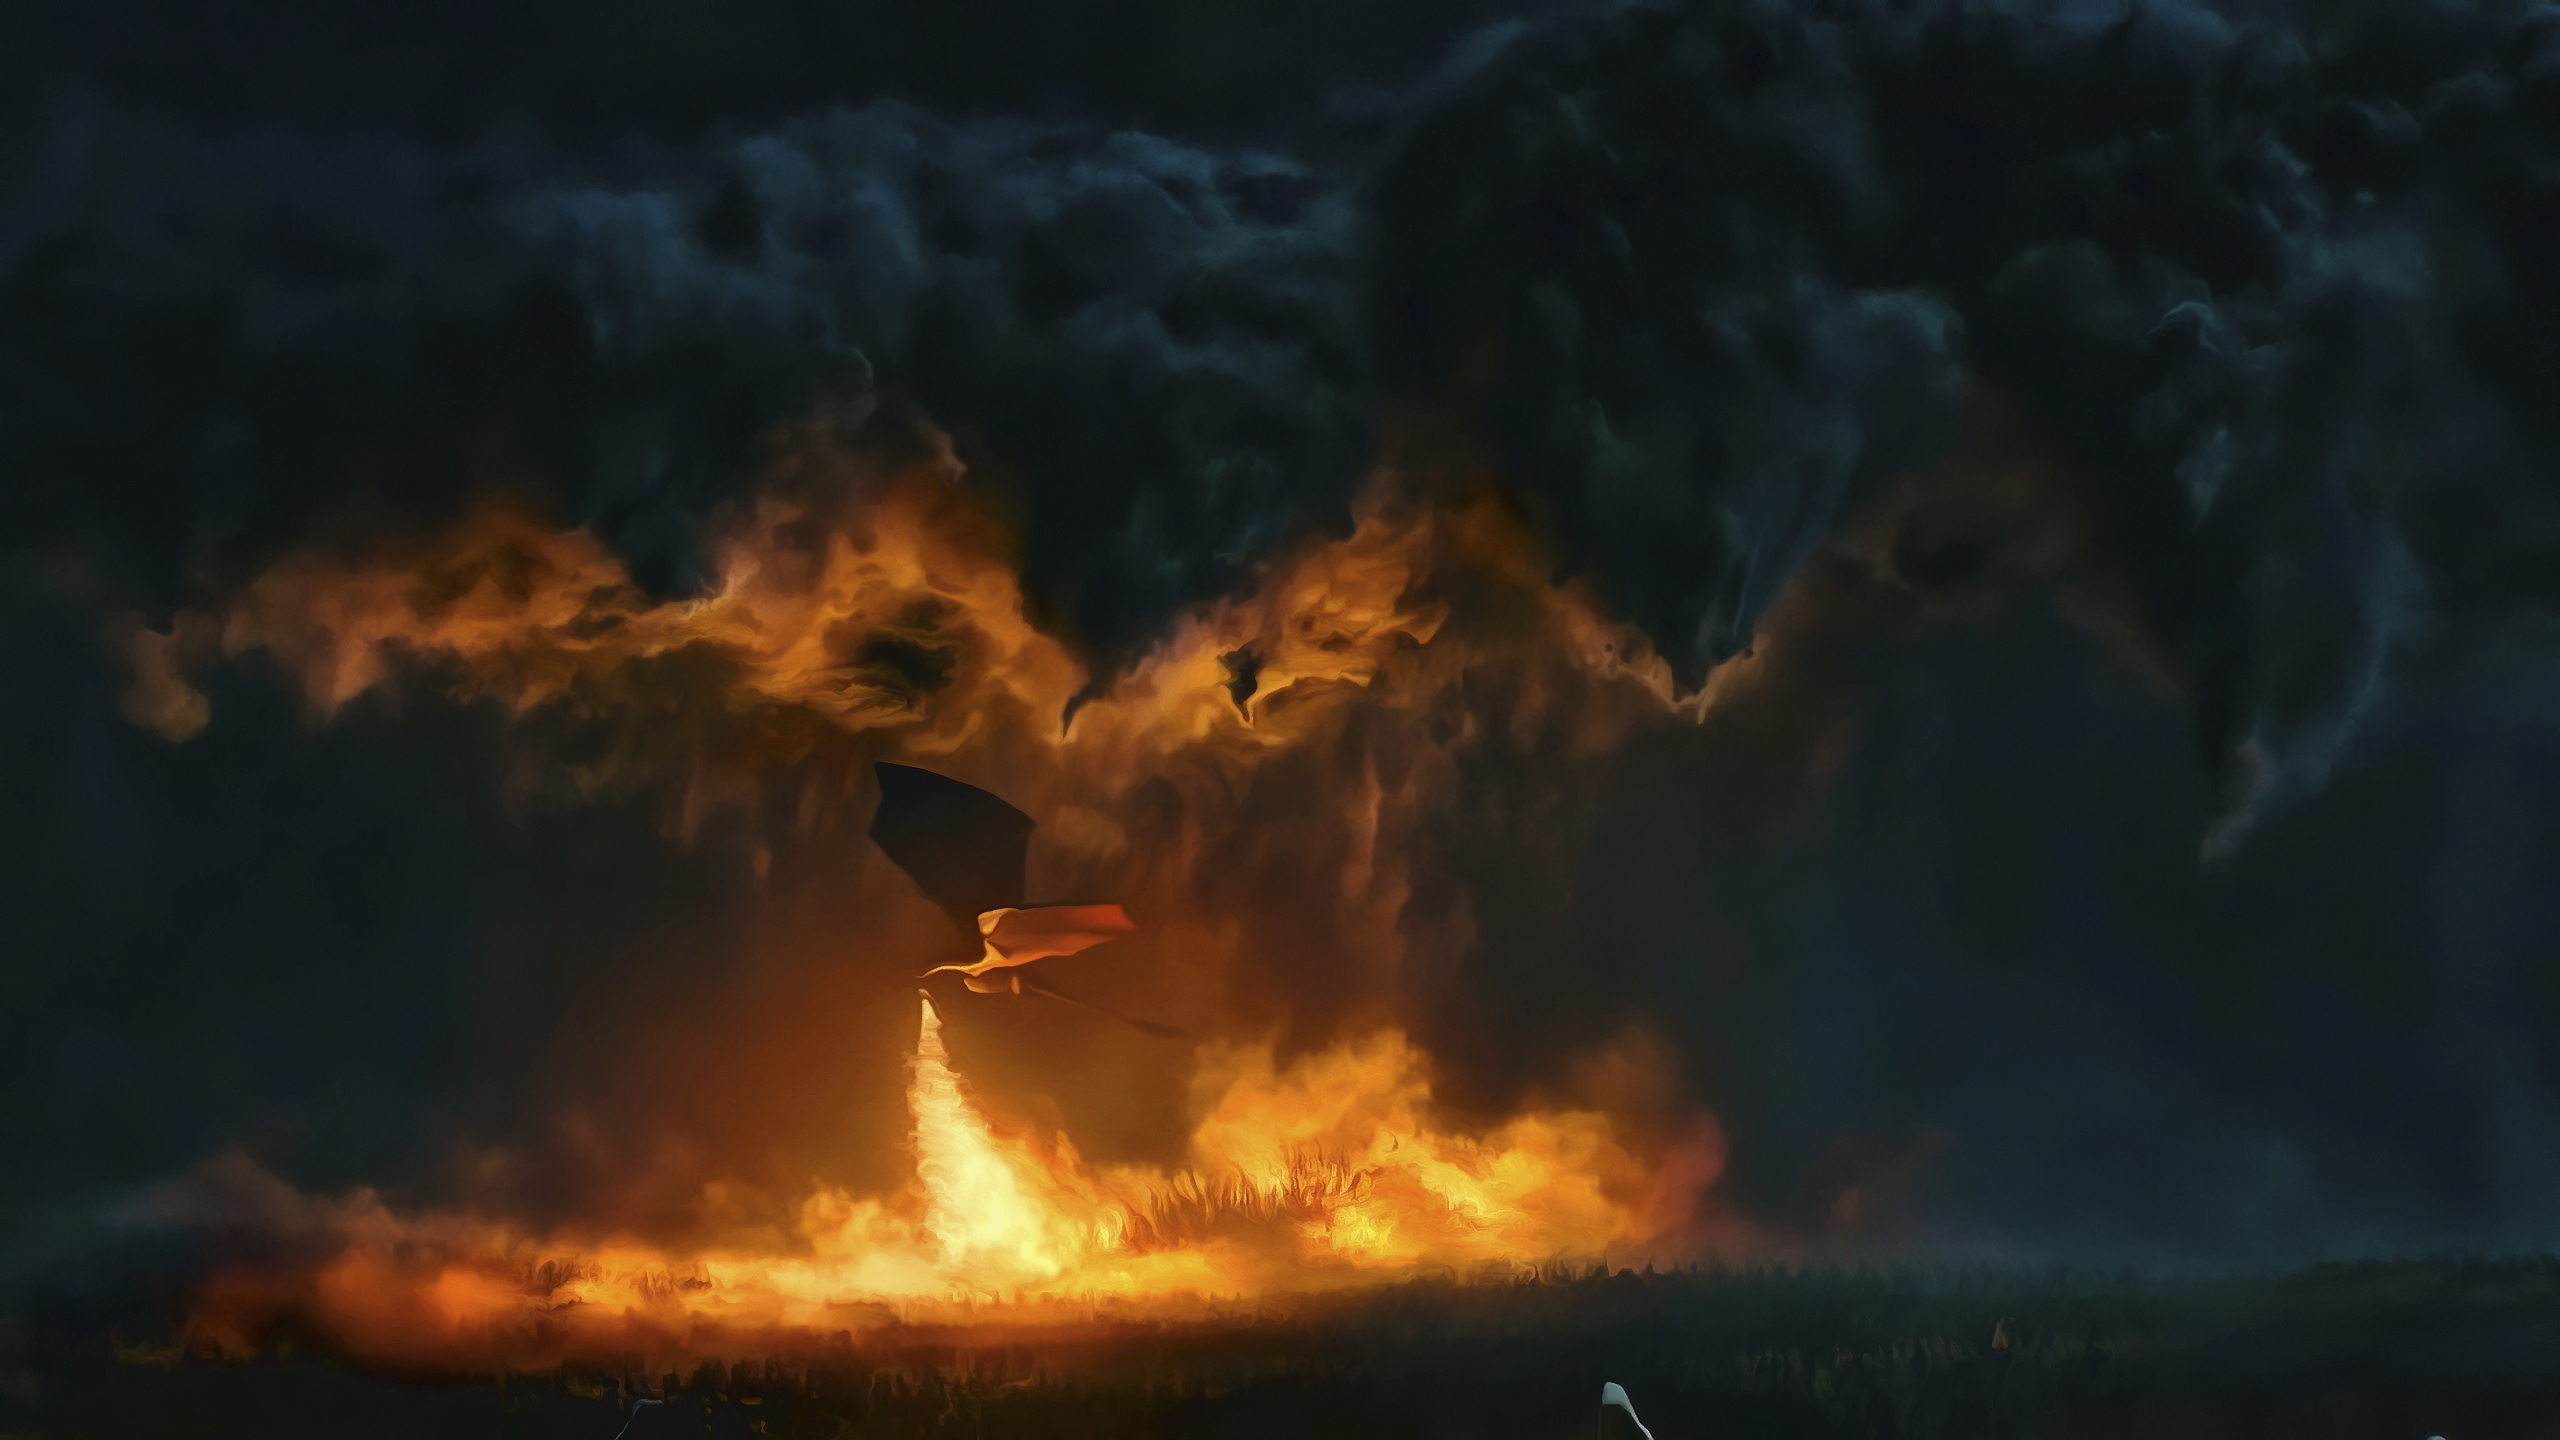 2560x1440 Game Of Thrones Dragon Fire 1440p Resolution Wallpaper